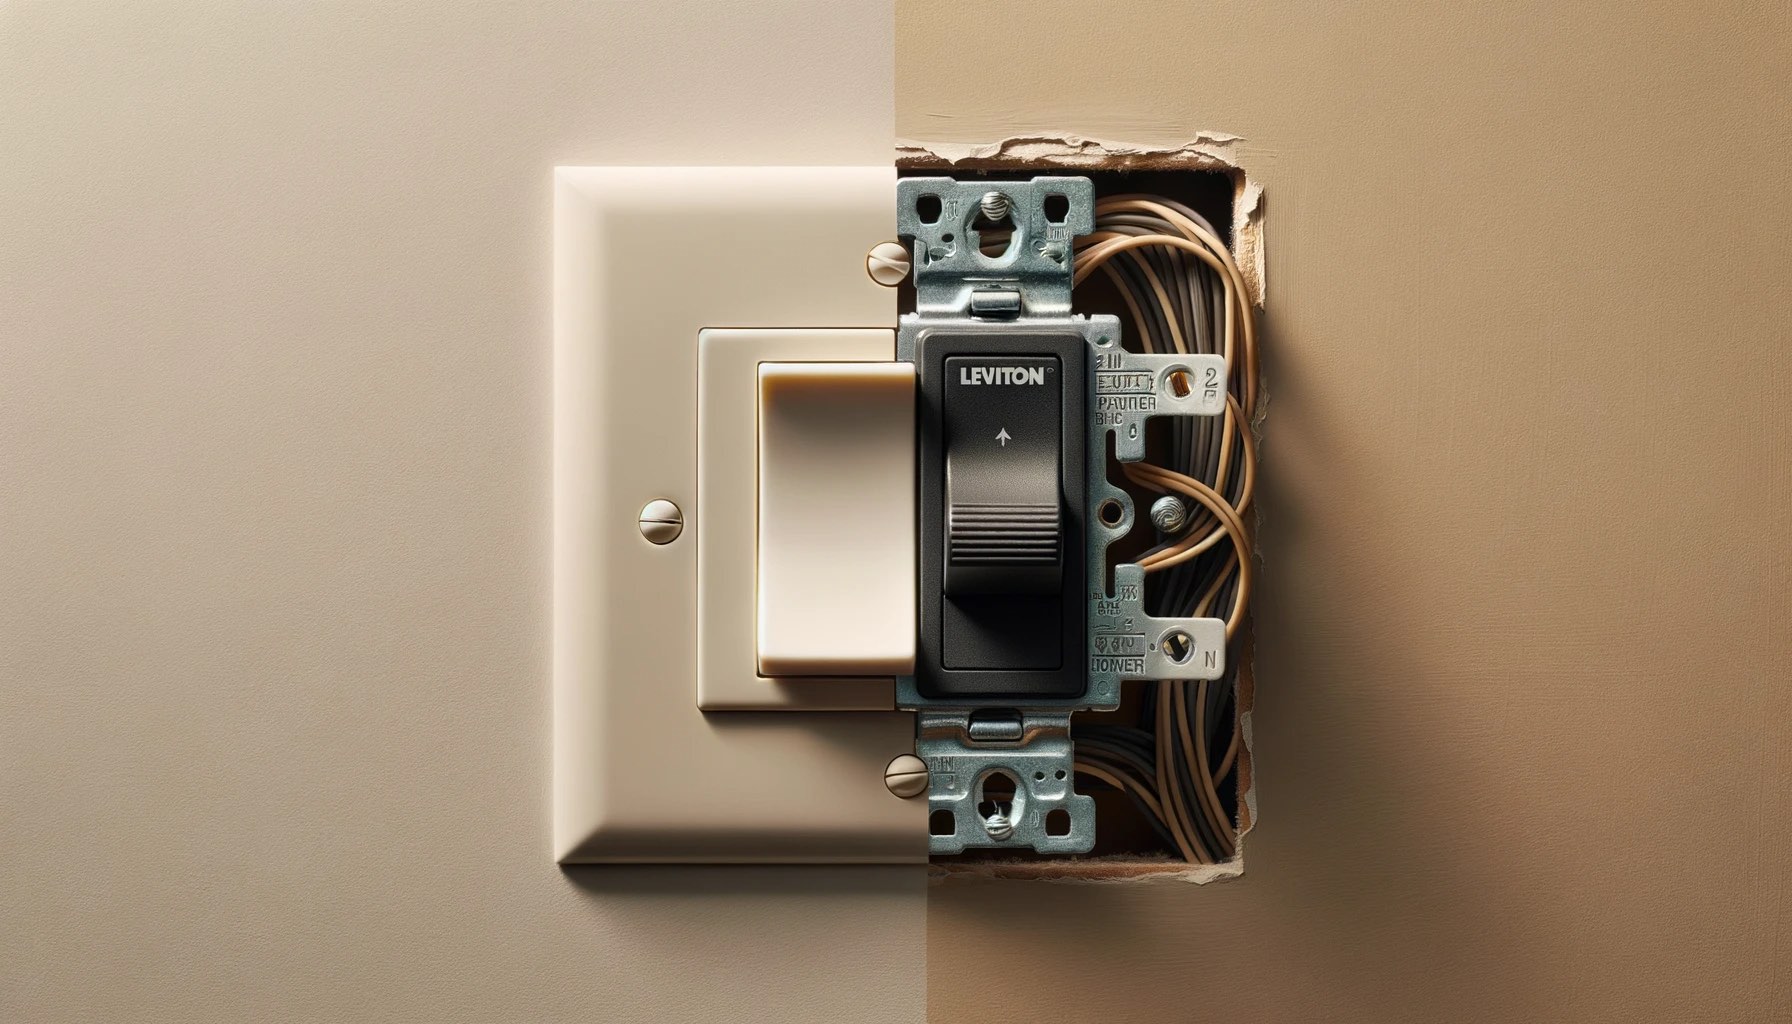 How To Wire A Leviton Dimmer Switch